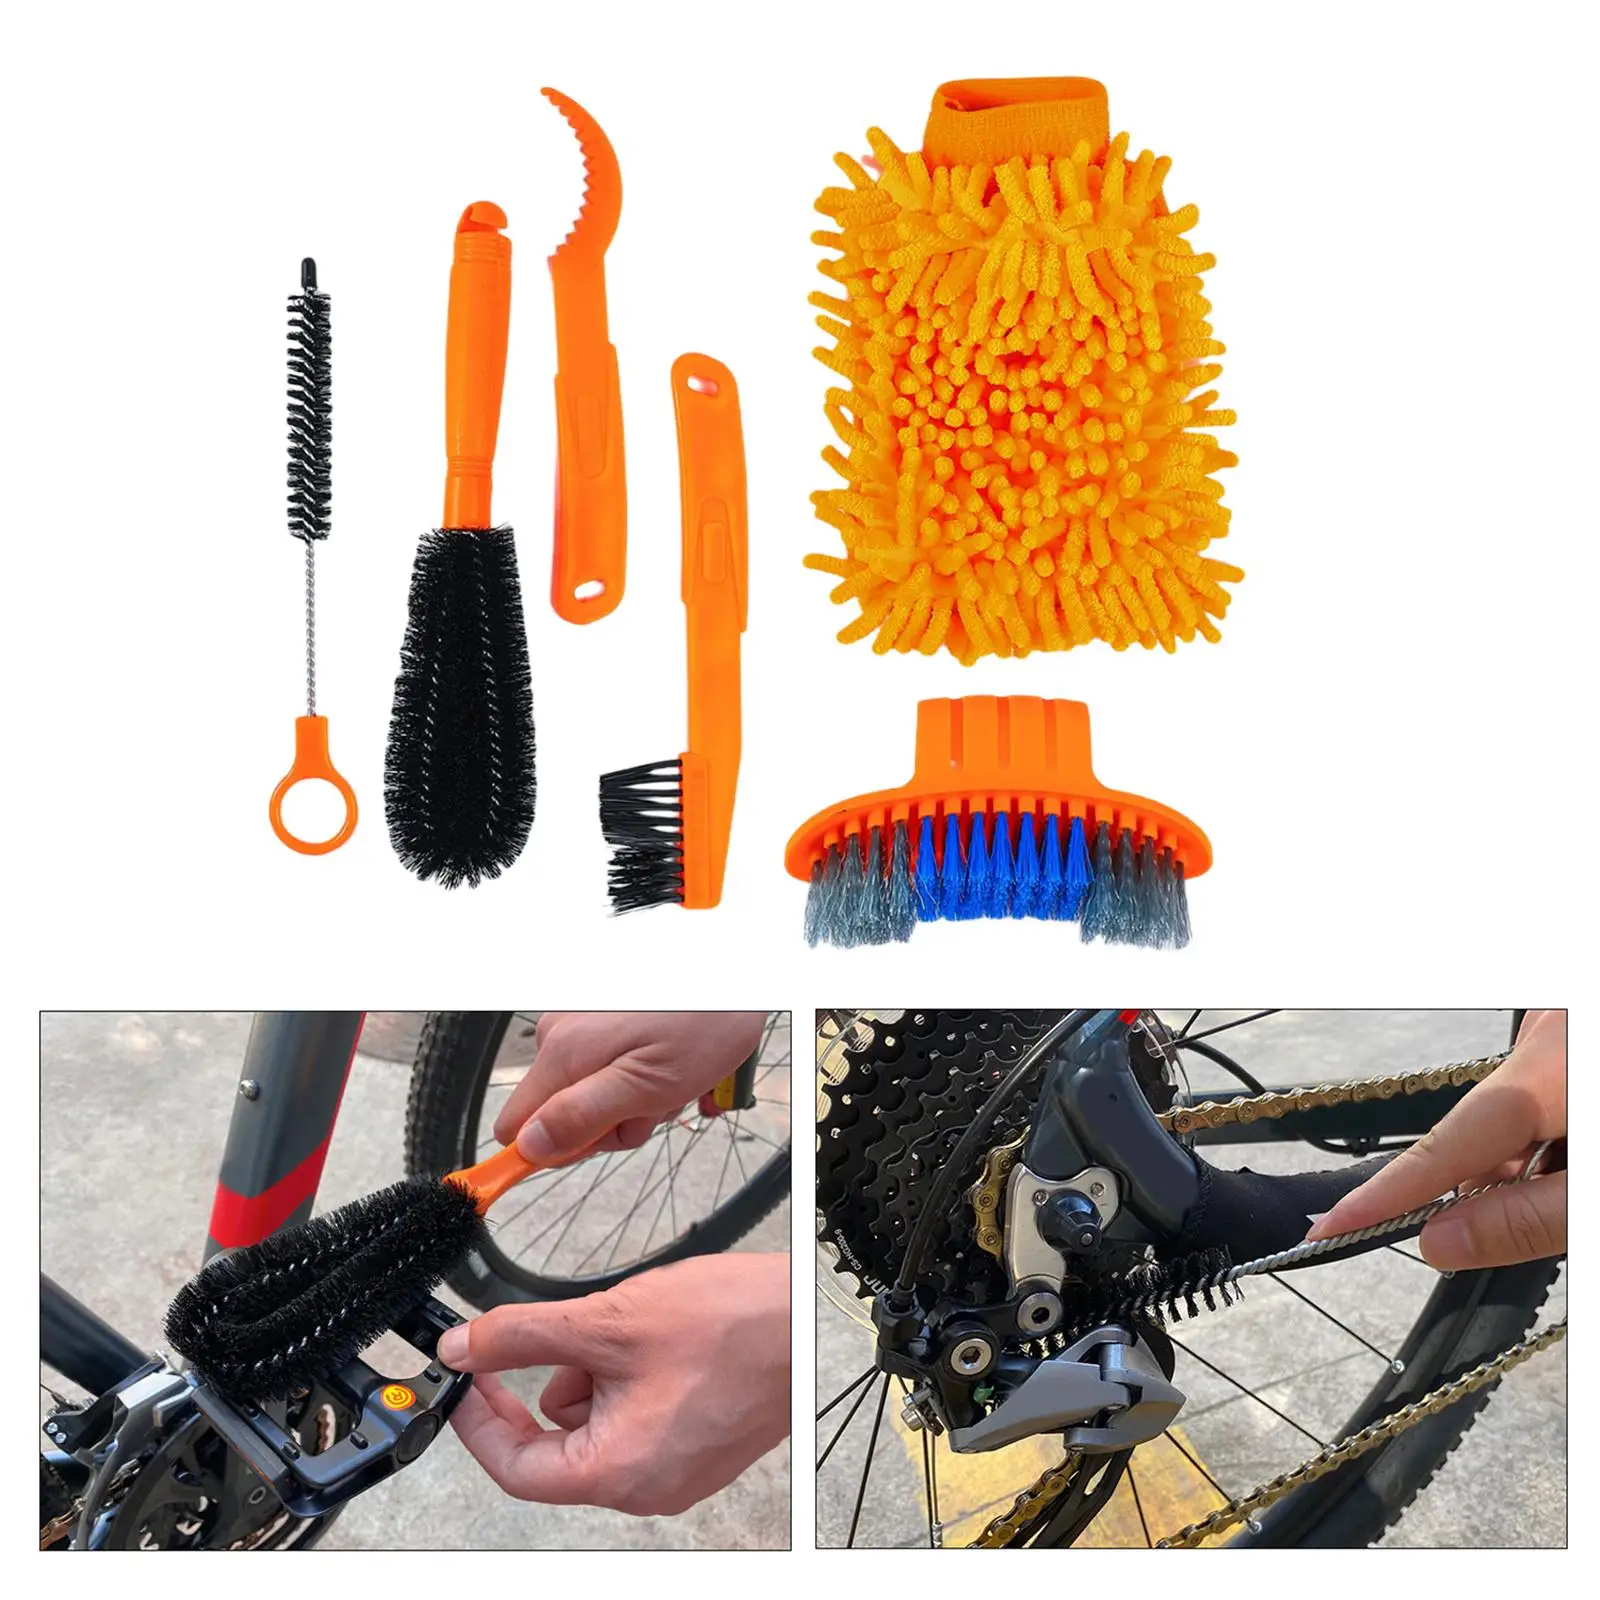 Bicycle Chain Cleaner City Bike Cleaning Kit Tire Scrubber for Crank Chain